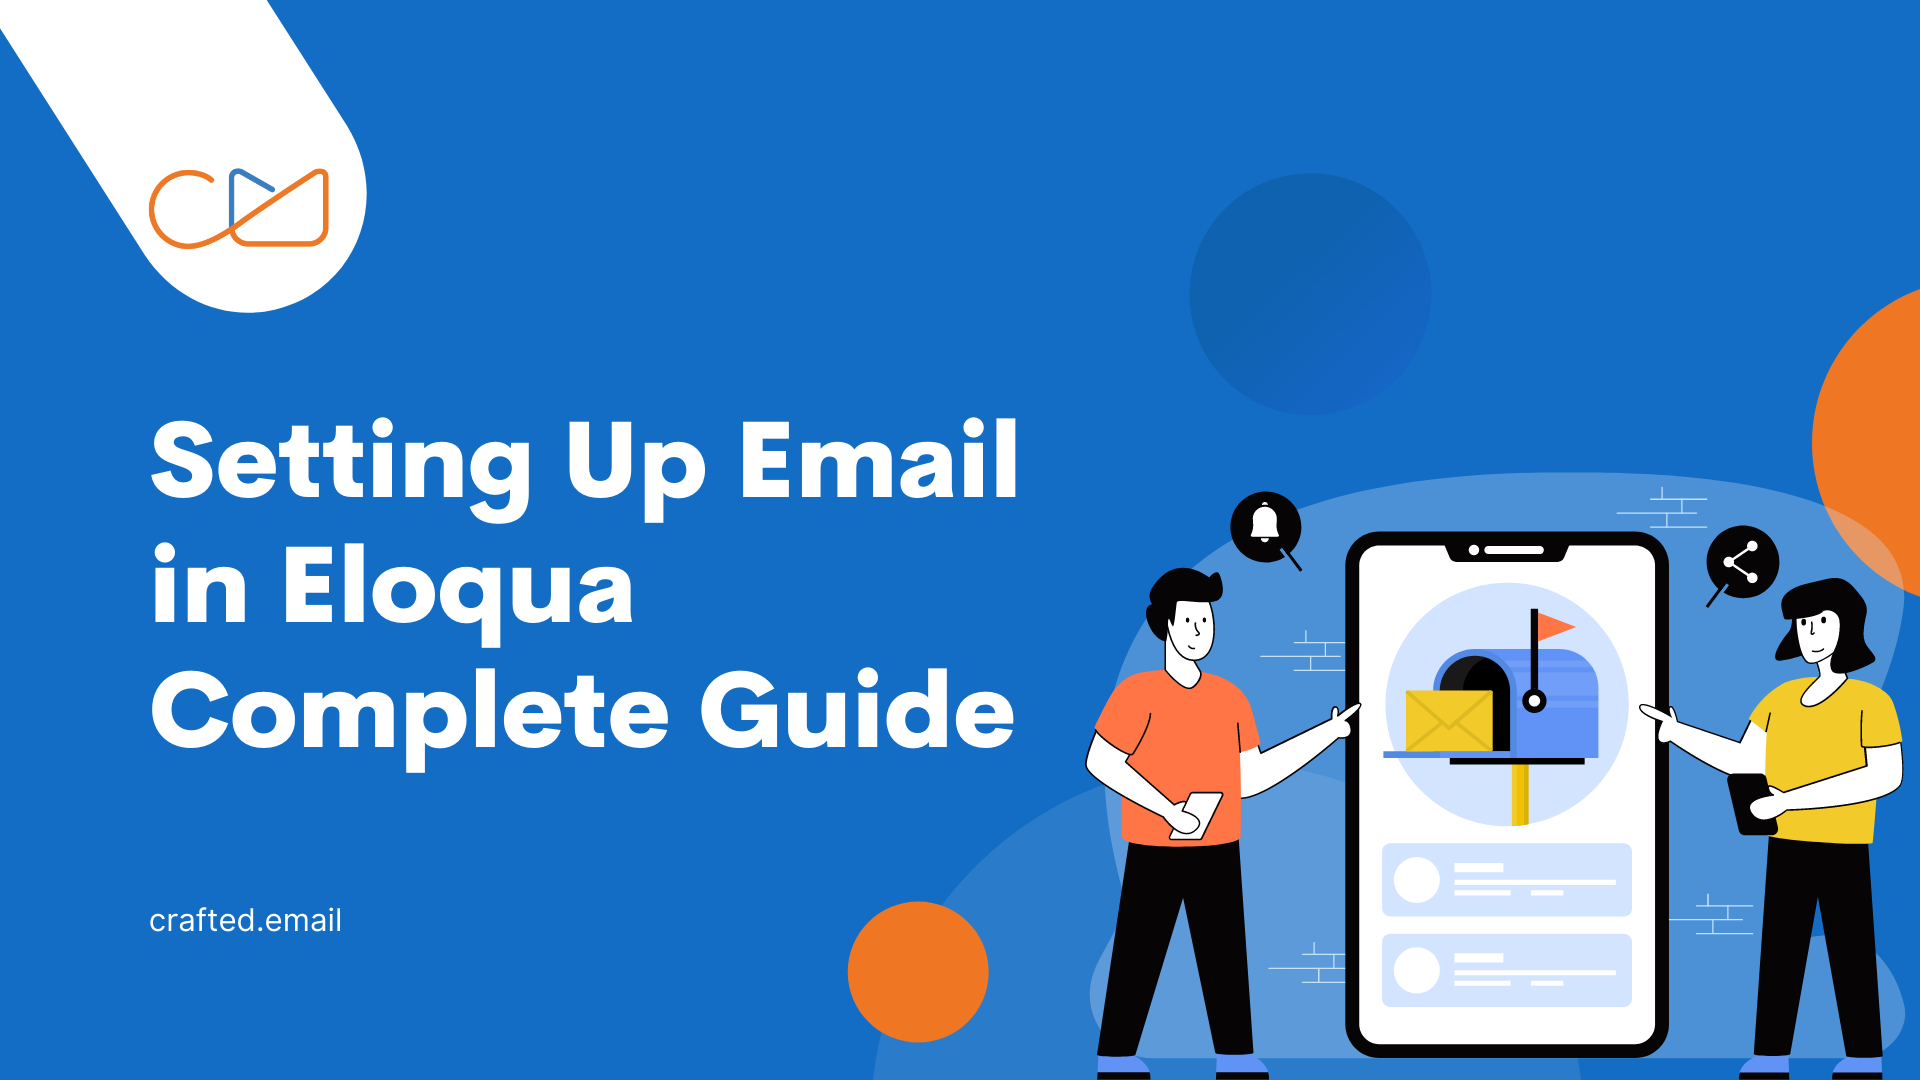 Setting Up Email in Eloqua Complete Guide